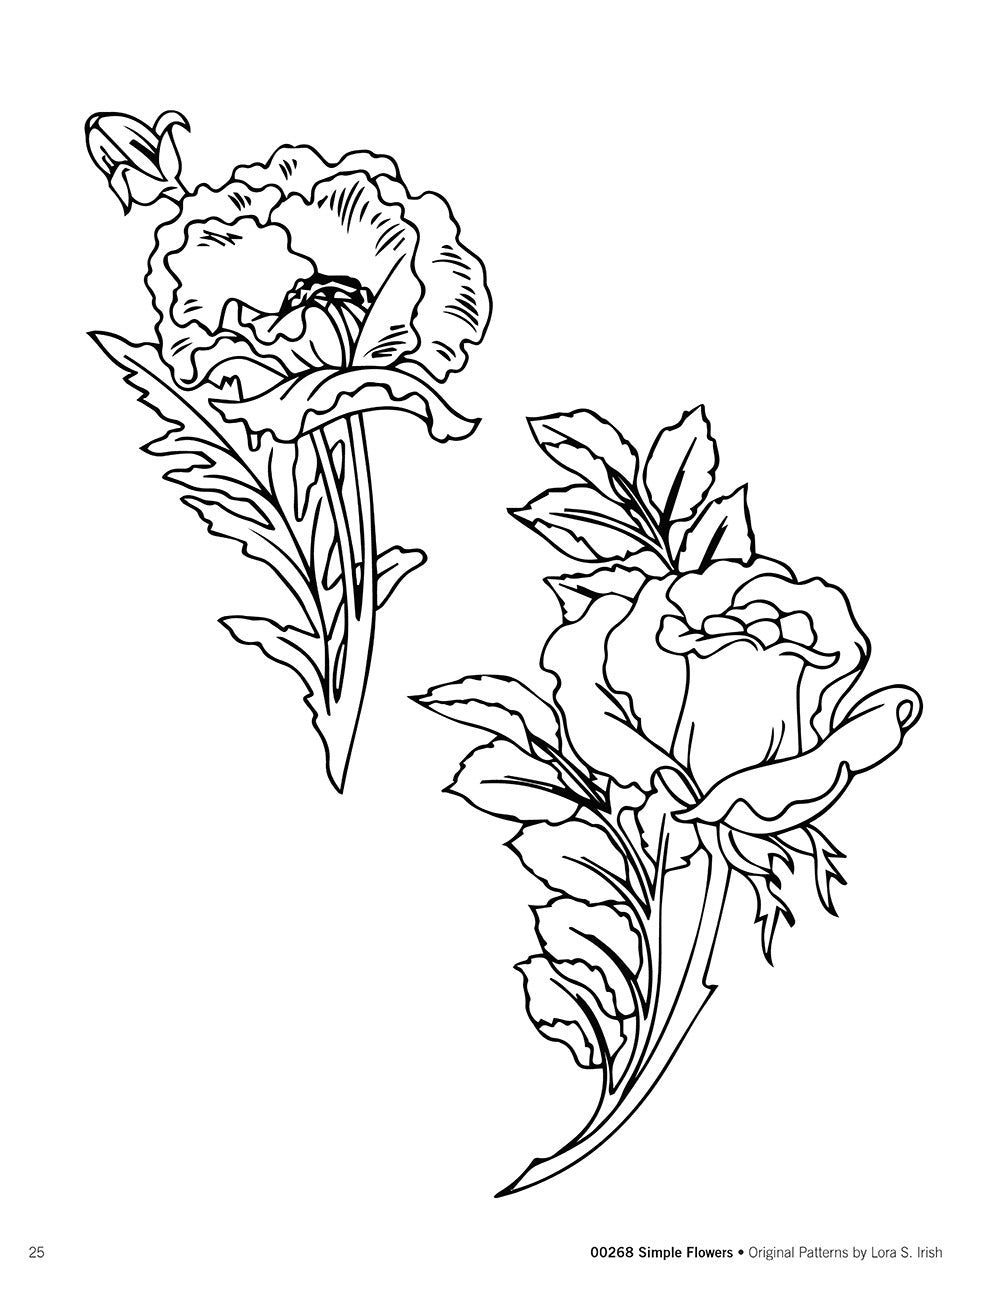 Simple Flowers Carving Patterns